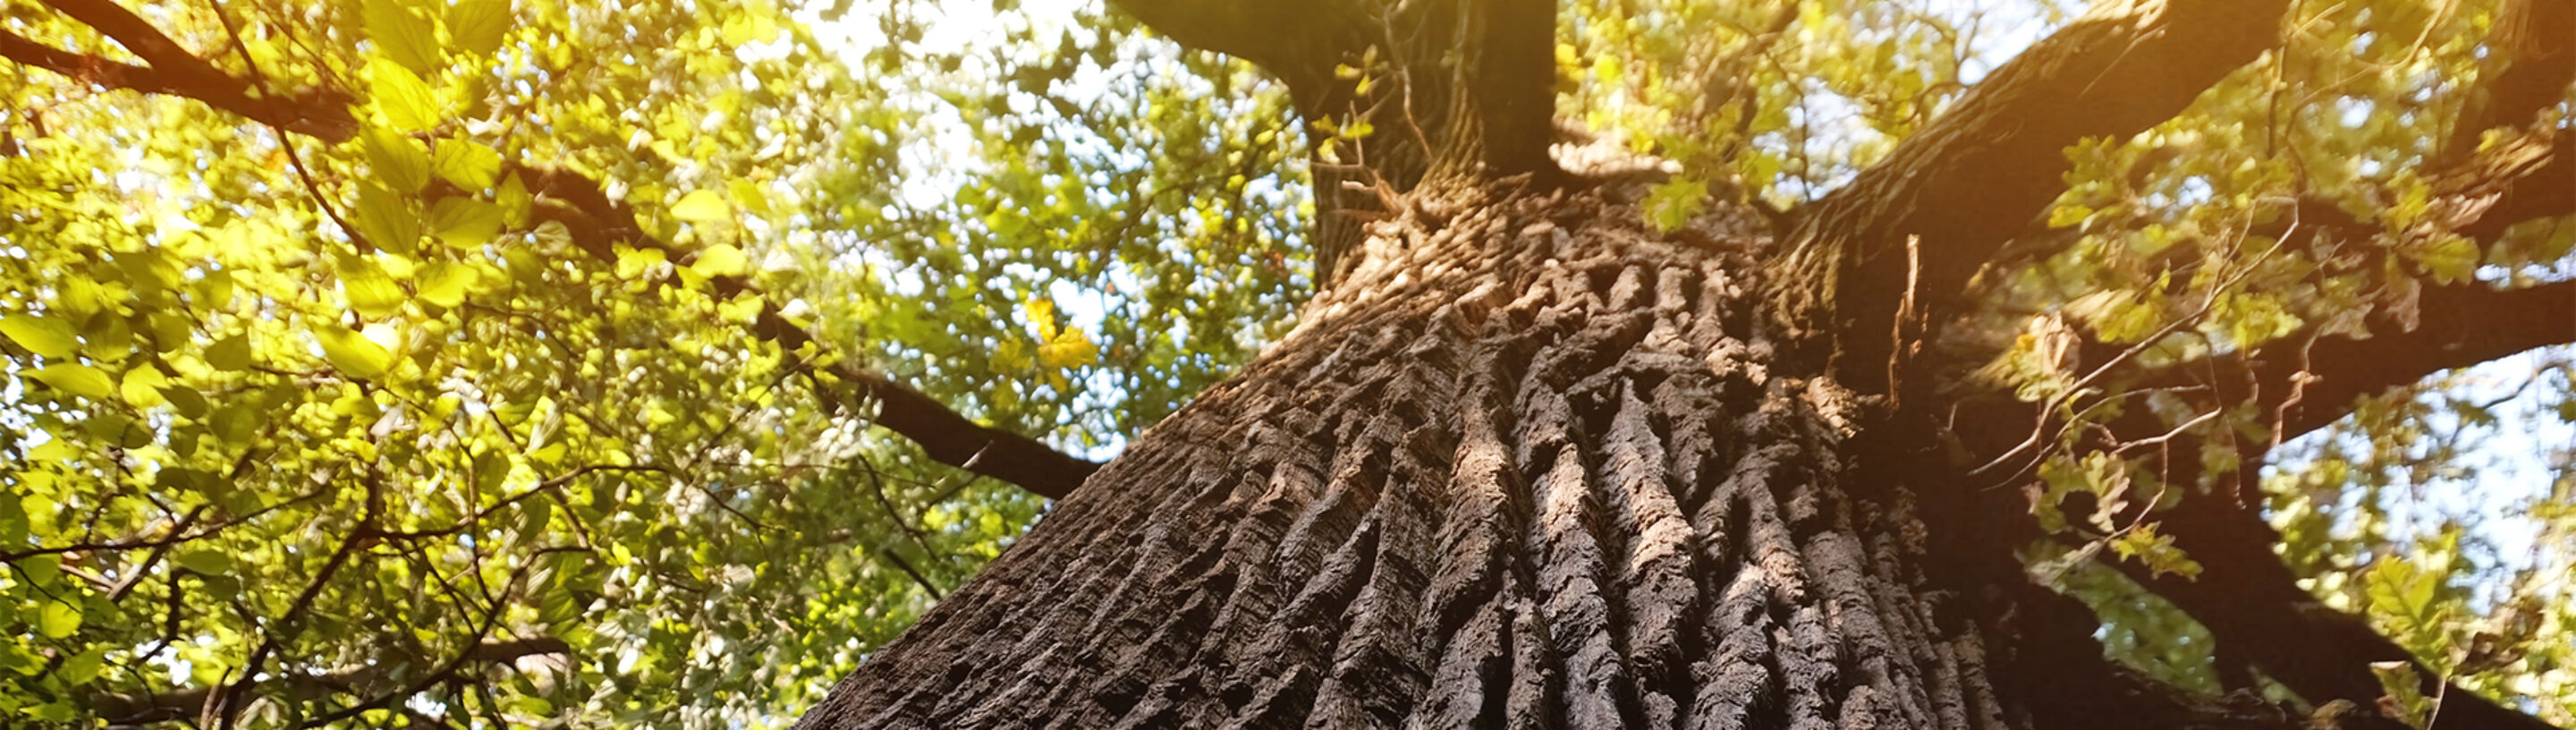 Stock photo of a very large tree looking from the ground up at its branches and leaves against a sunny sky